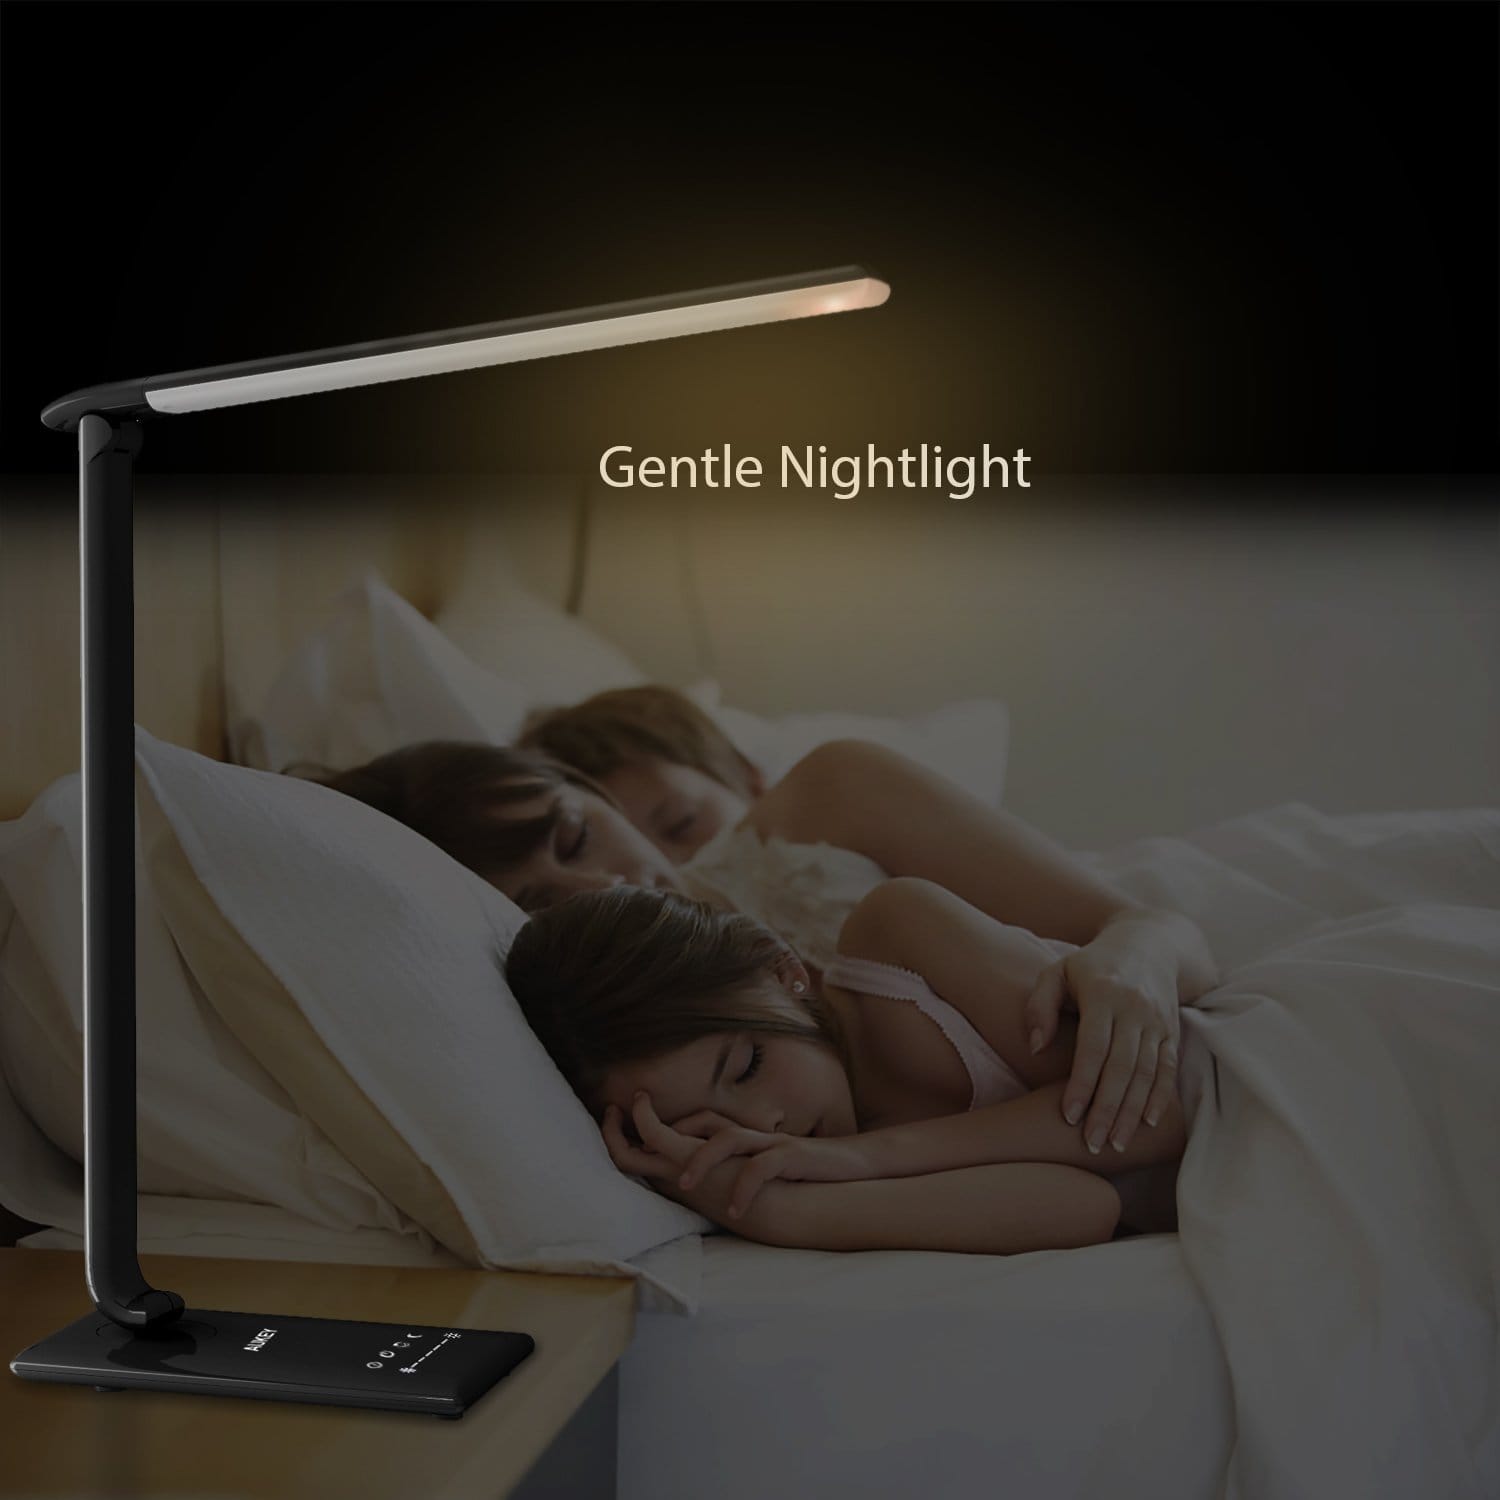 AUKEY LT-T10 Touch 12W 7 Level Dimmable LED Desk Lamp - Aukey Malaysia Official Store